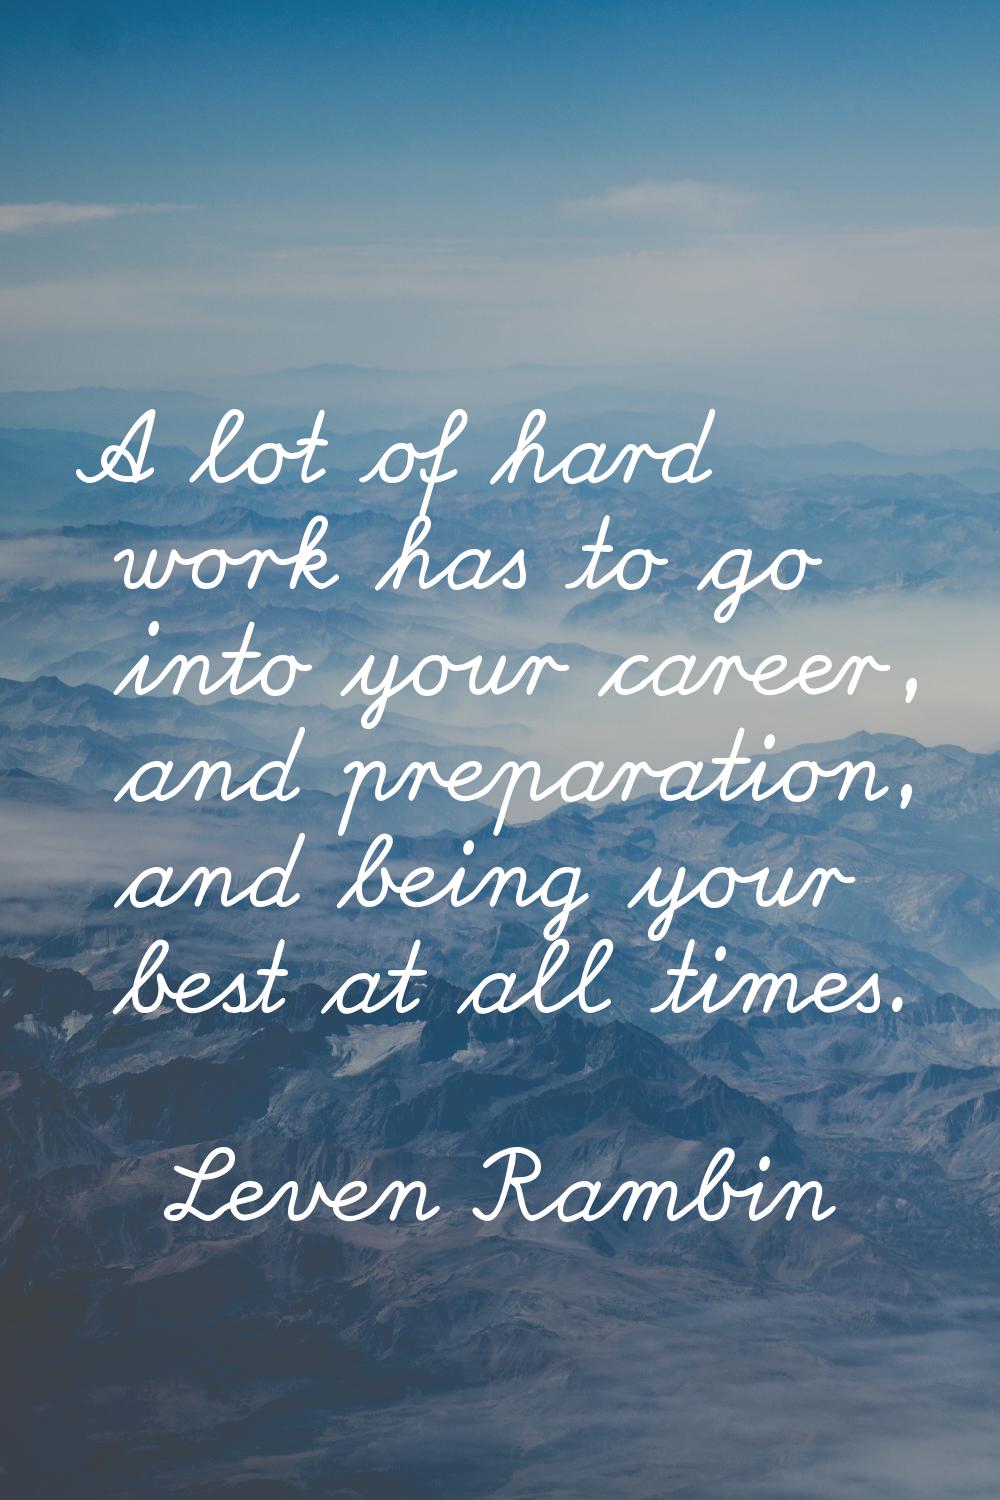 A lot of hard work has to go into your career, and preparation, and being your best at all times.